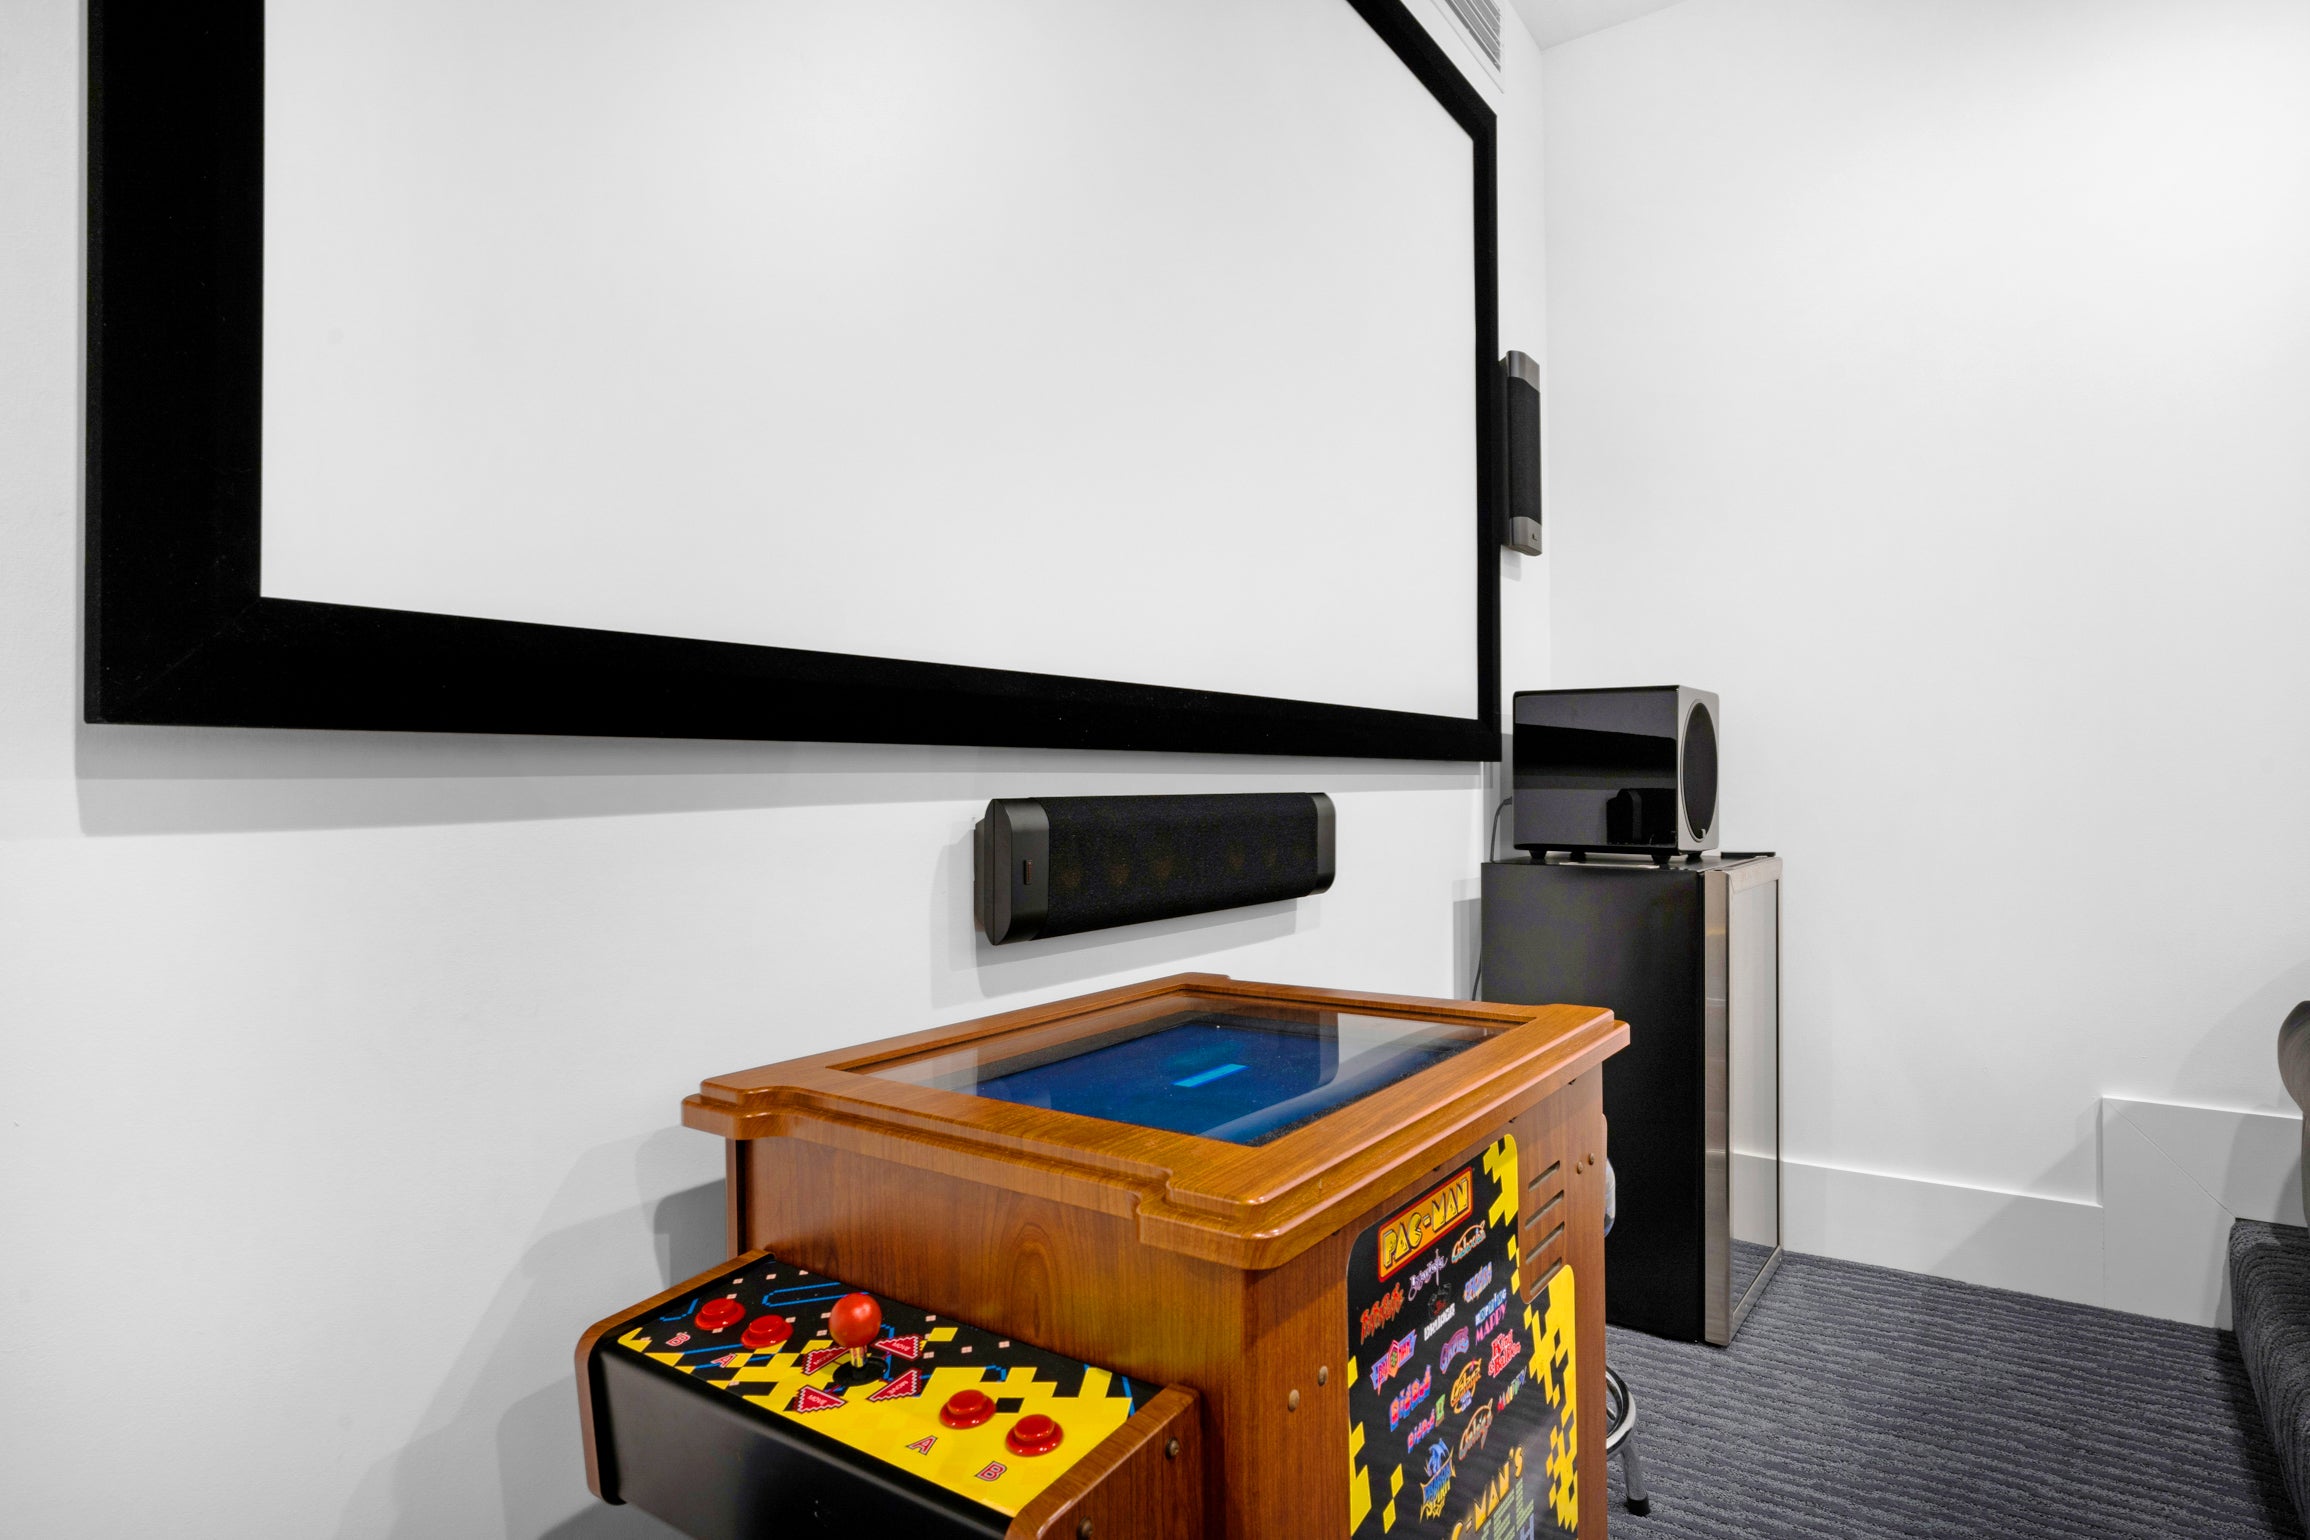 Play some games in the theater room